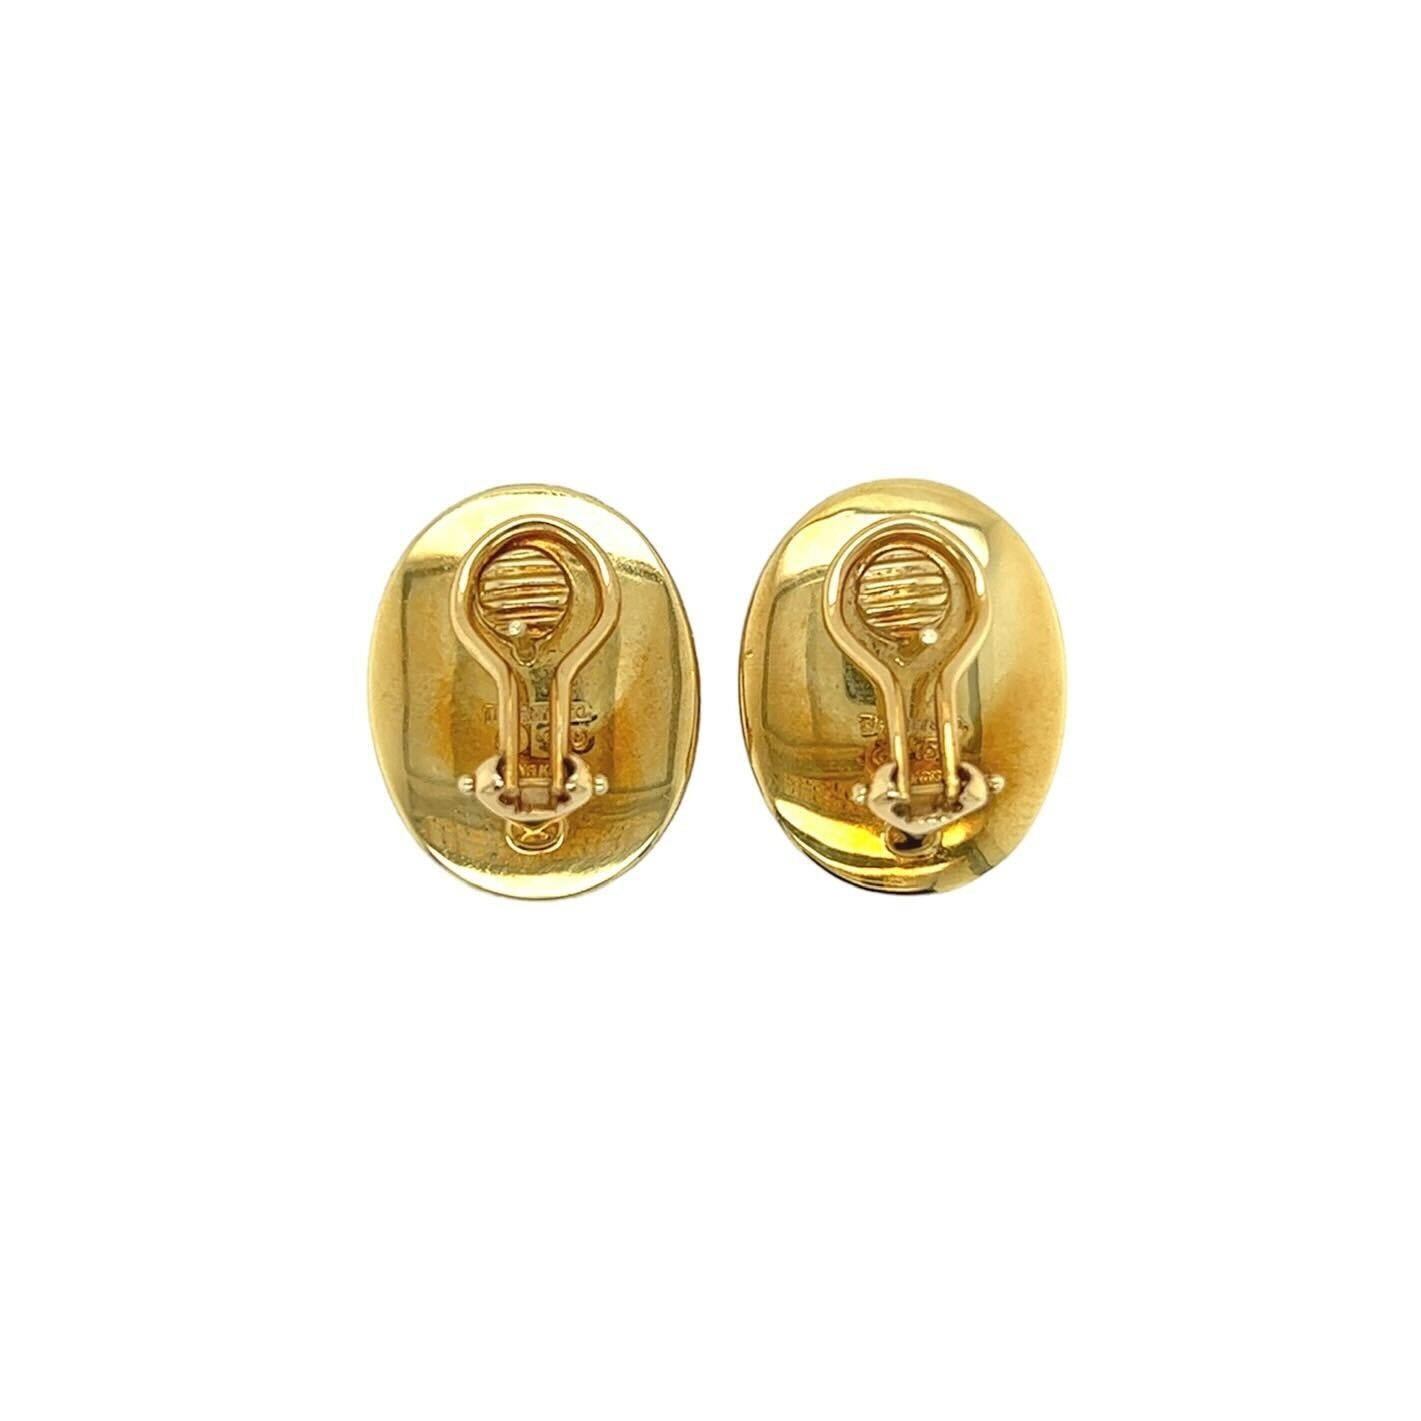 A pair of 18 karat yellow gold and mother of pearl earrings, Tiffany & Co.designed by Angela Cummings, circa 1980s. The “Positive and Negative” model  designed as domed ovals of polished yellow gold and white mother of pearl inlay. Length